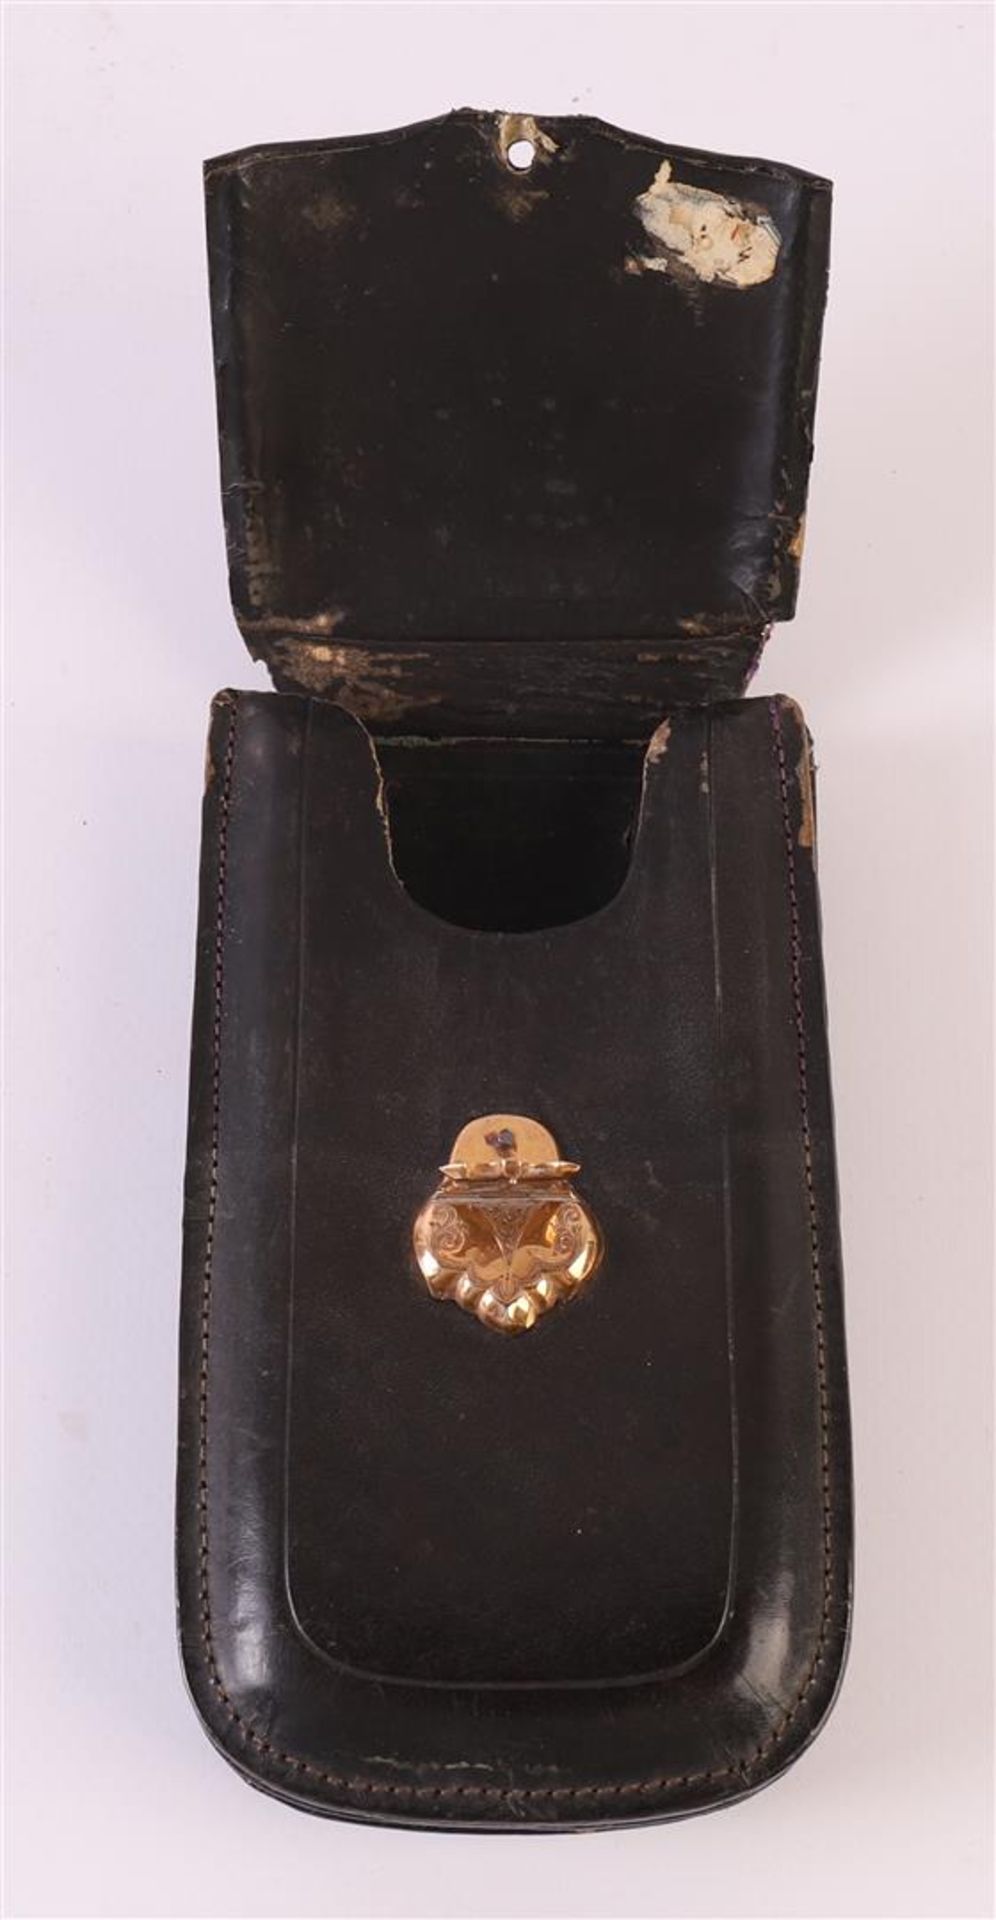 A brown leather cigar case with gold frame, 19th century, l 14.5 x w 8 cm. - Image 2 of 4